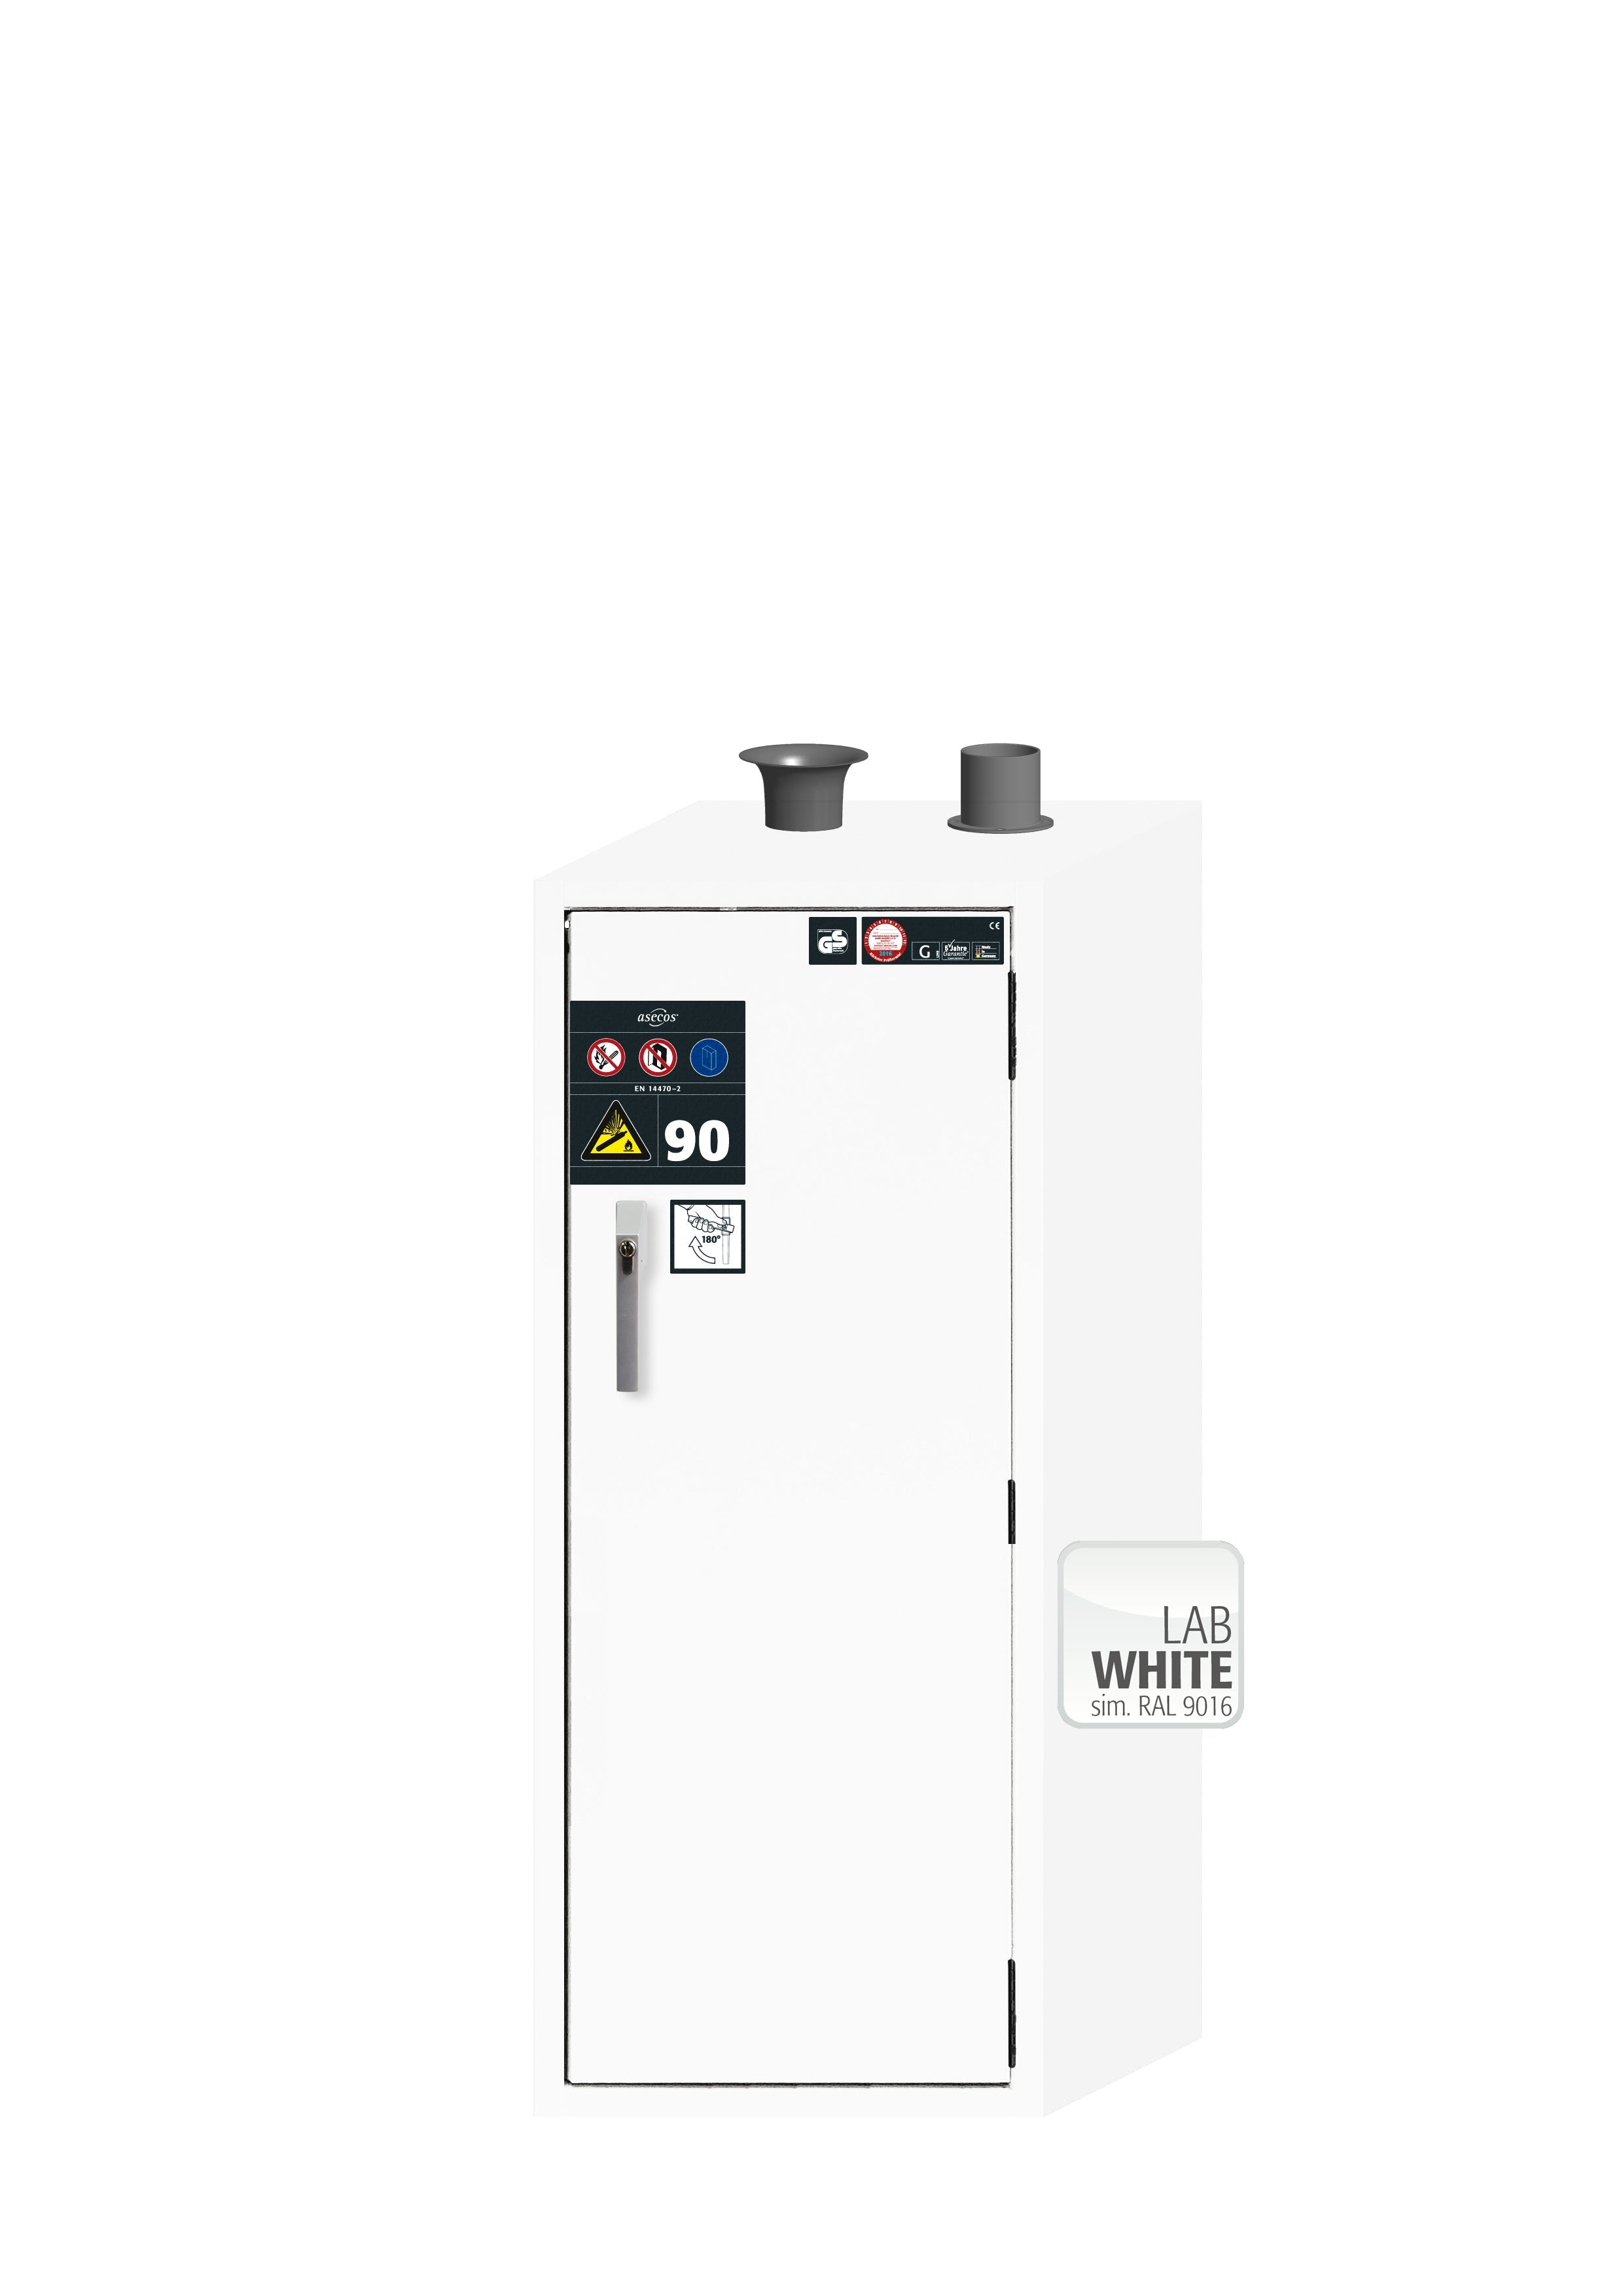 Type 90 compressed gas bottle cabinet G-ULTIMATE-90 model G90.145.060.R in laboratory white (similar to RAL 9016) with for 2x compressed gas bottles of 10 liters each